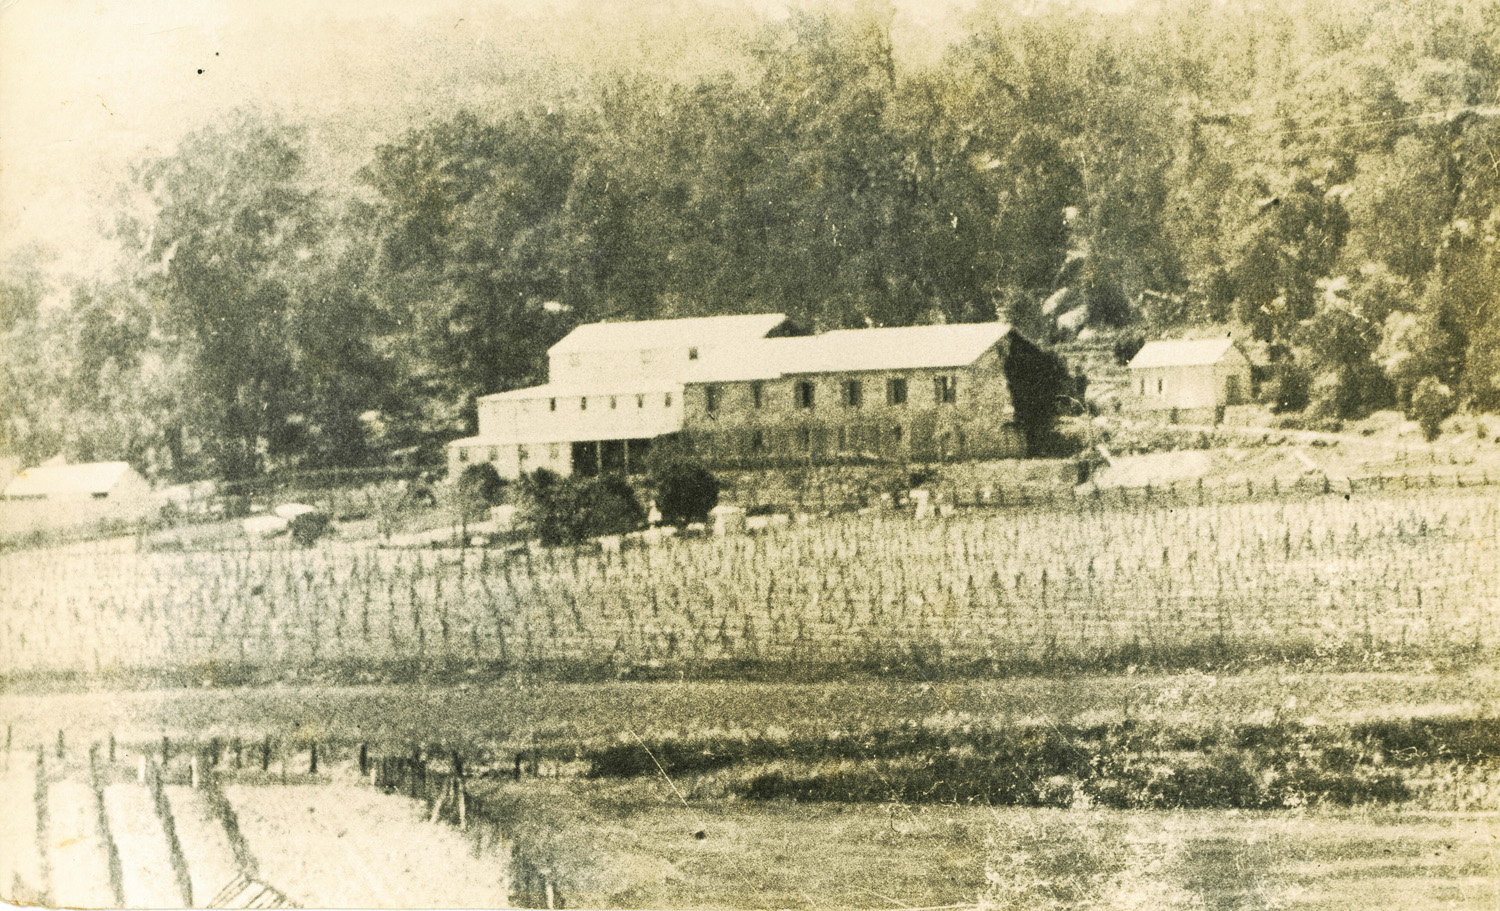 Image 3 of 6 - Black and white image of vineyards. In the background there is a few small buildings and forestry.